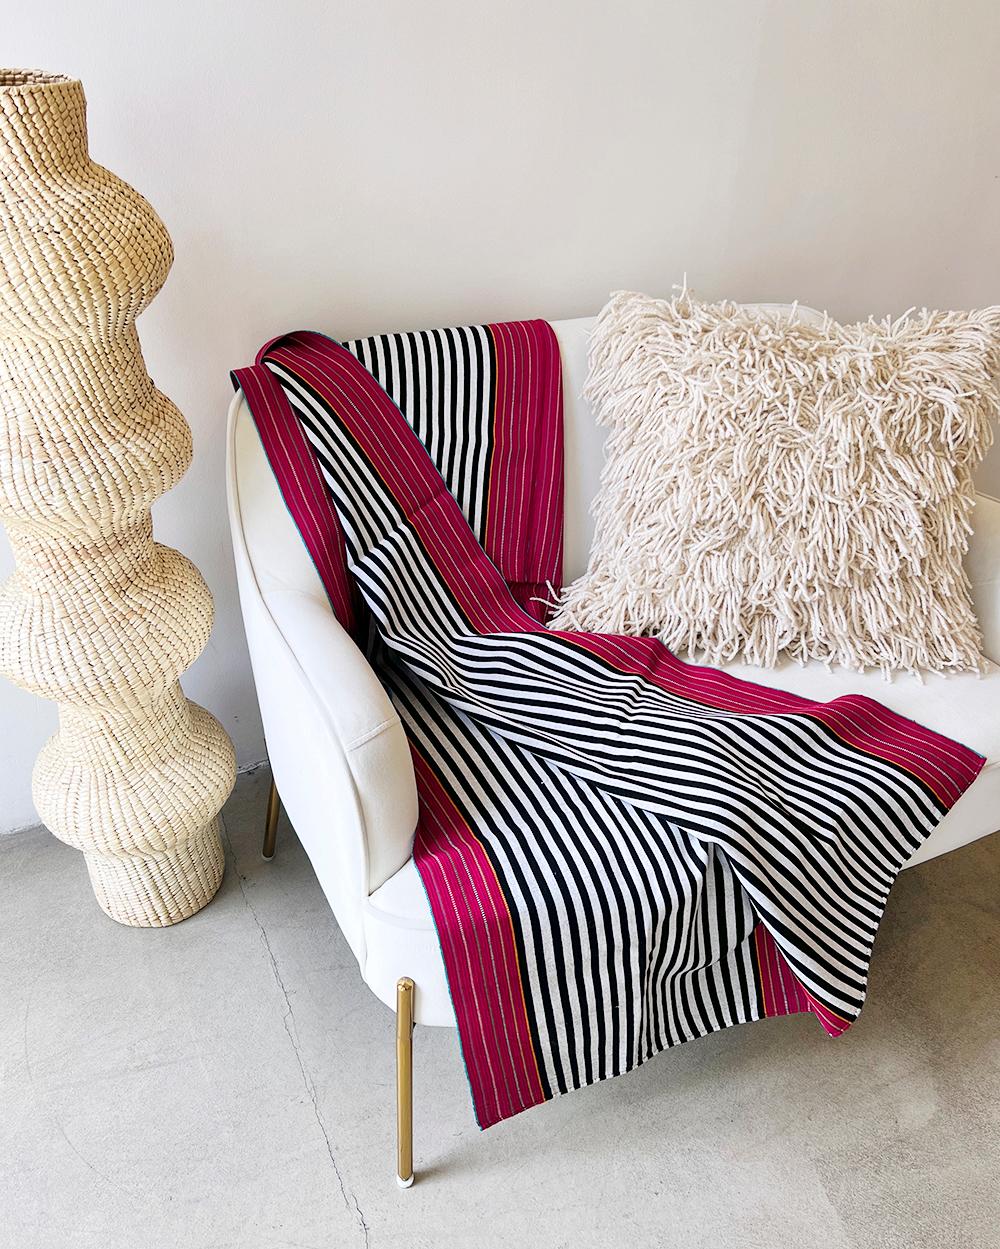 A bold and colorful throw for your home

This classic striped blanket is handmade and crafted in Mexico from organic cotton and natural dye, blending traditional and modern elements in a bold and graphic design. Perfect for elevating any home decor,